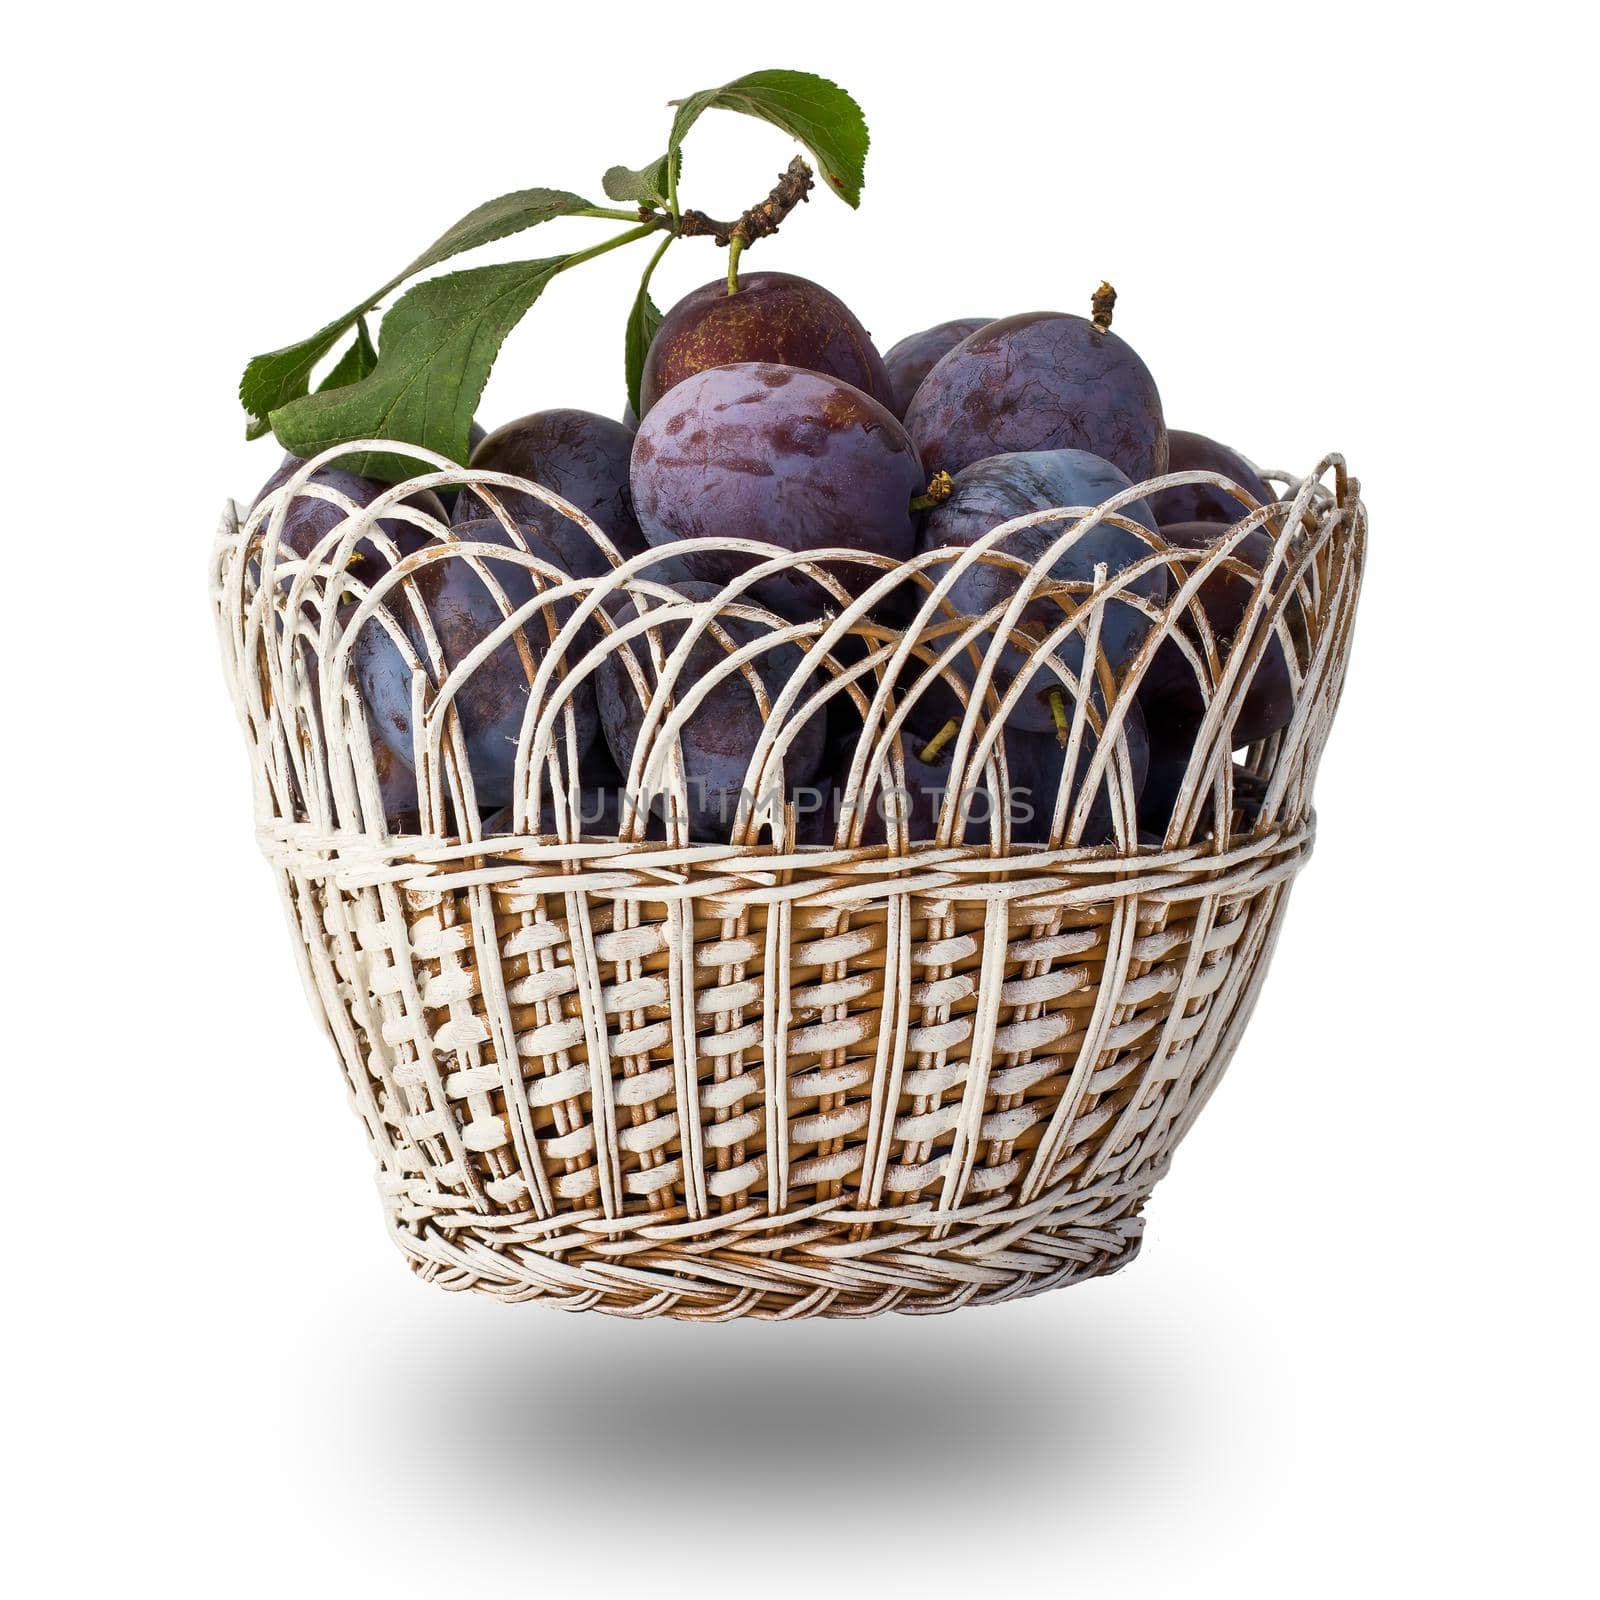 Just picked ripe plums in a wicker basket on the white isolated background. Just harvested fruits.